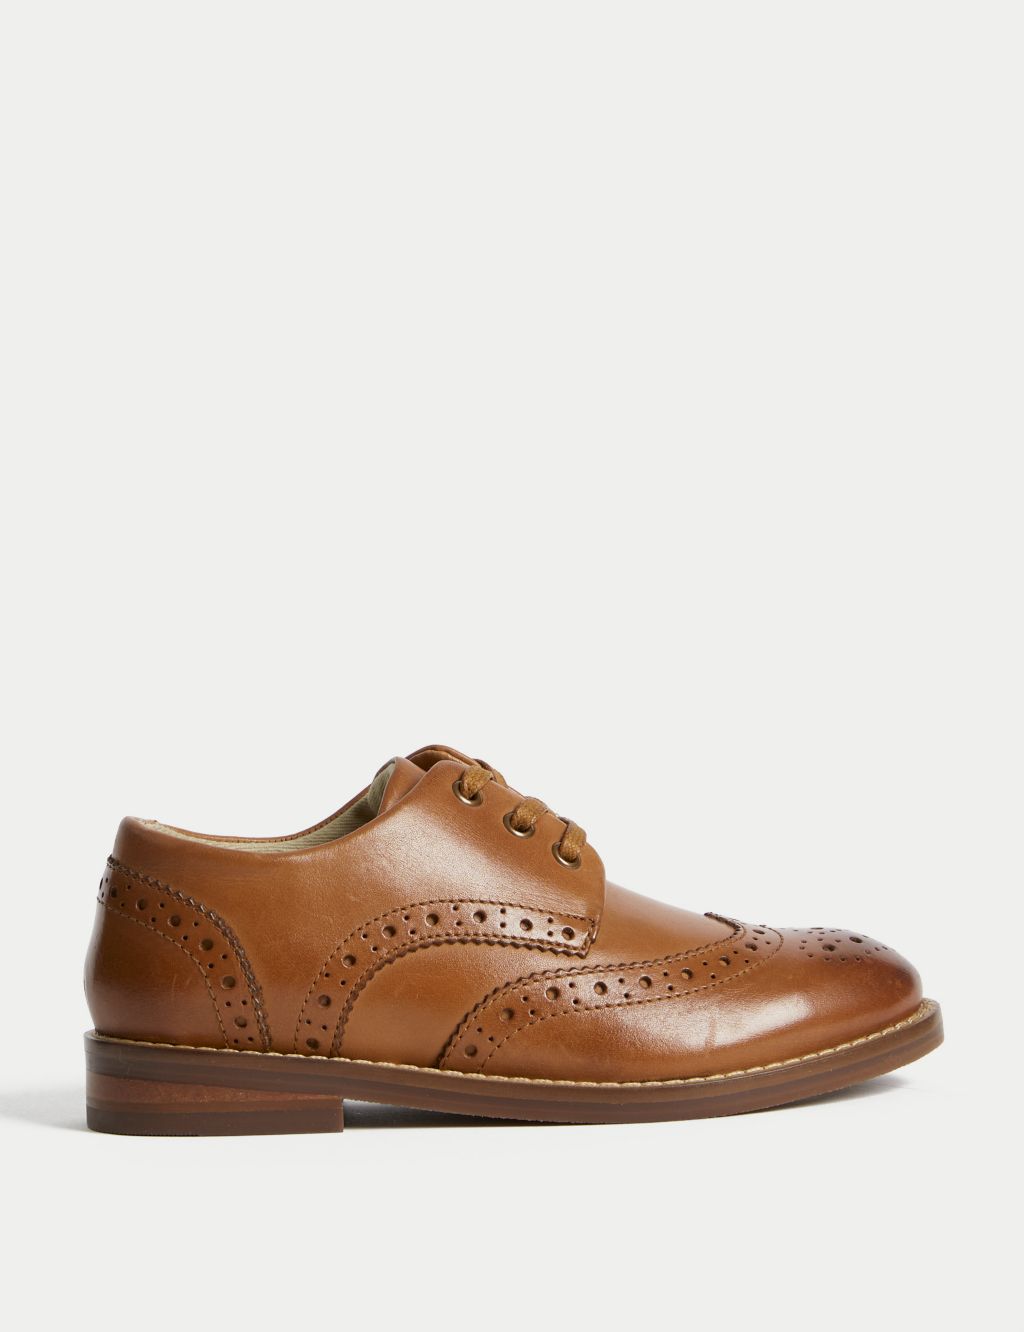 Kids' Leather Brogues (8 Smal l - 2 Large) | M&S Collection | M&S